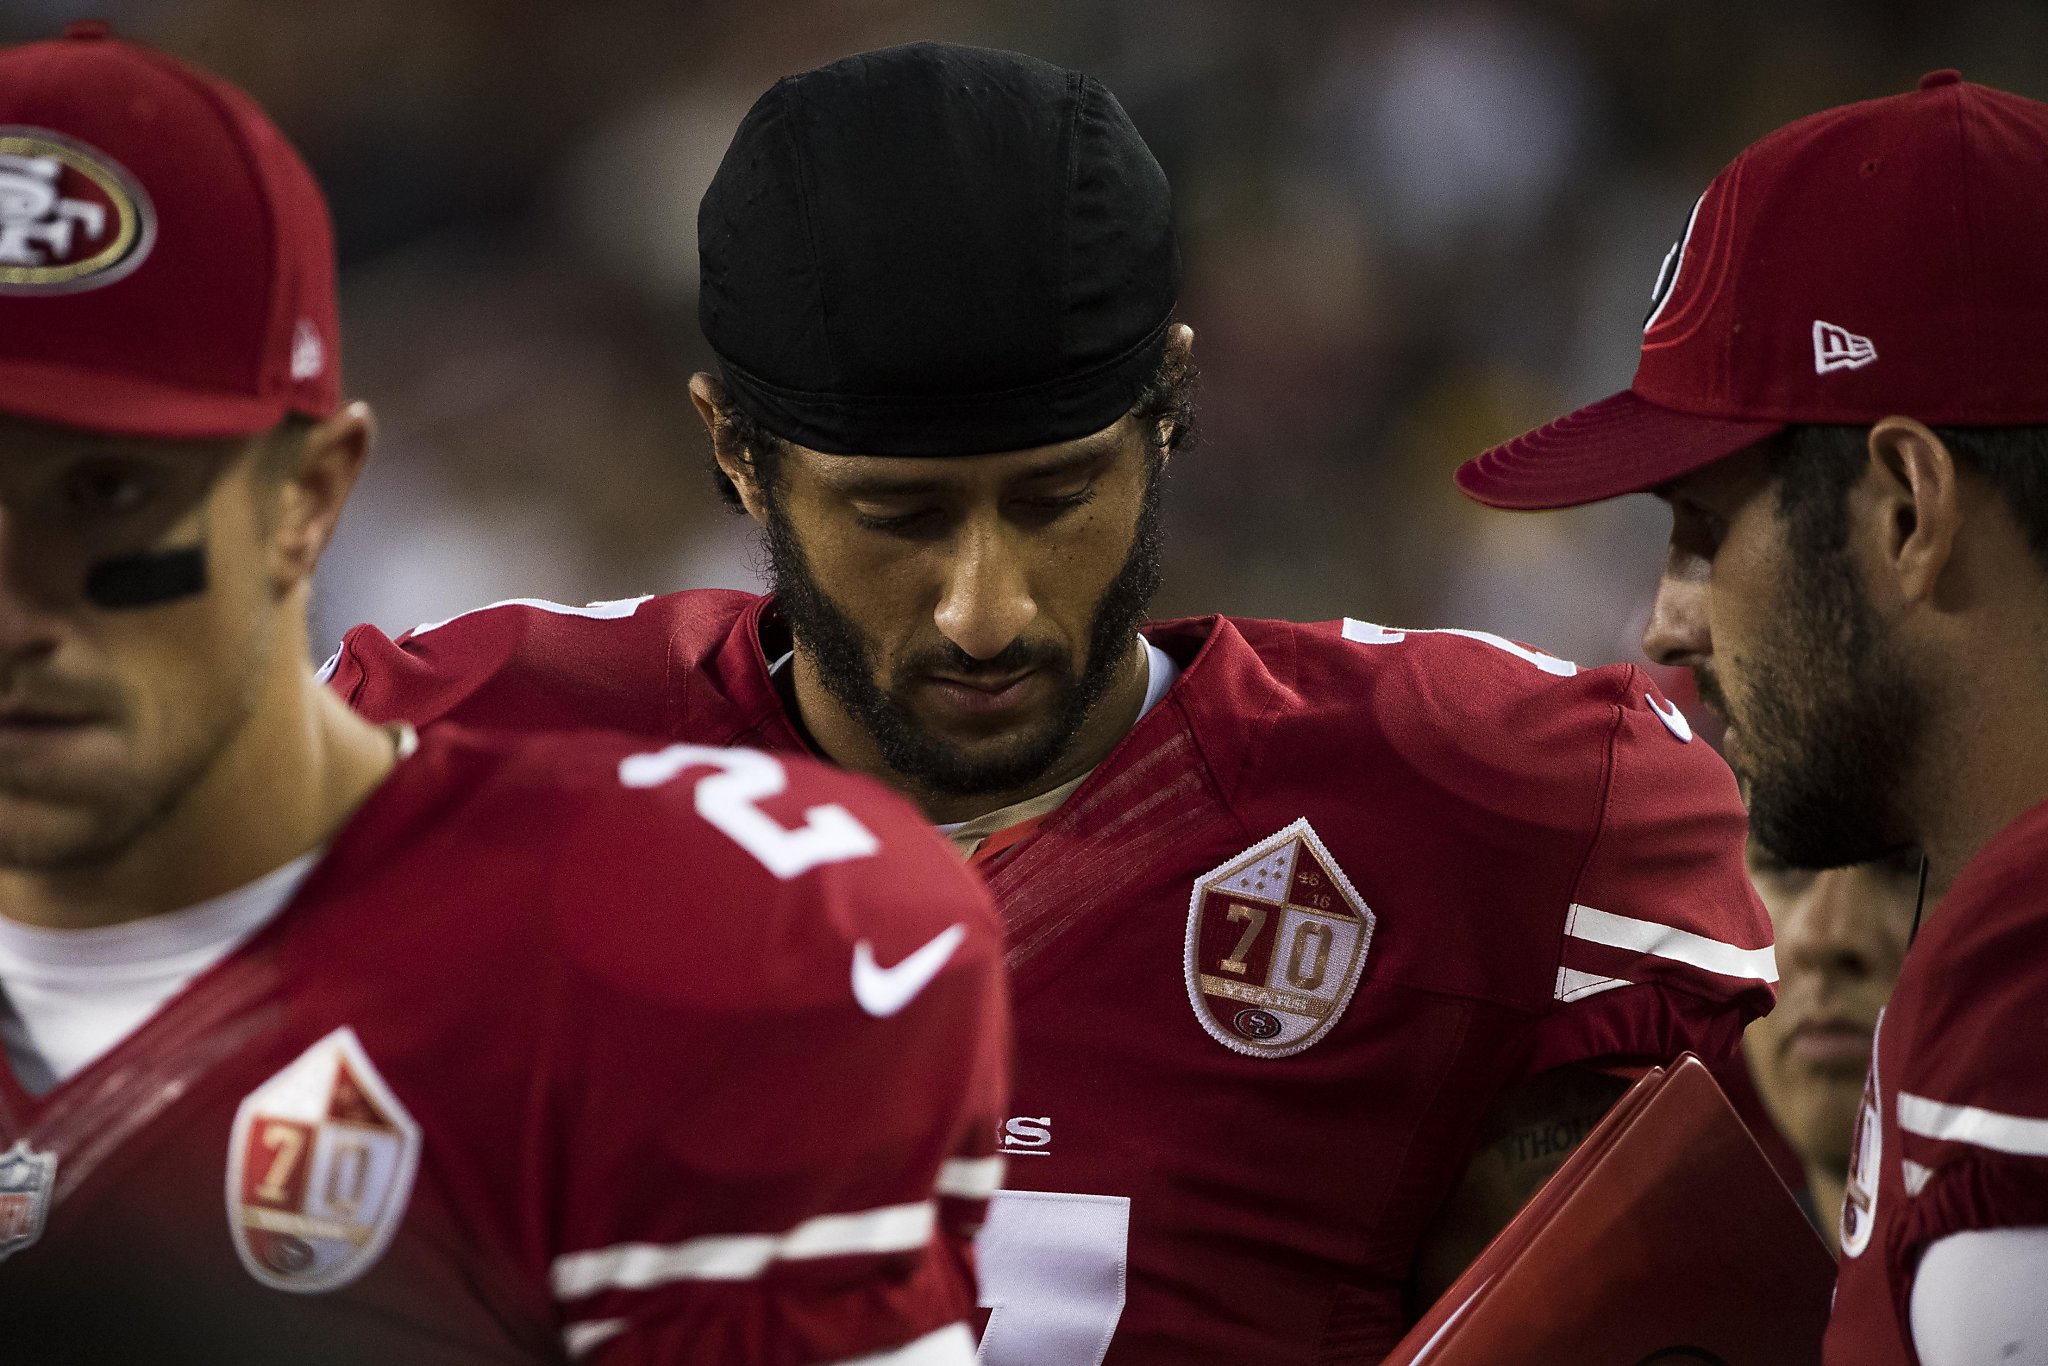 Colin Kaepernick and other pro athletes pay a price for activism